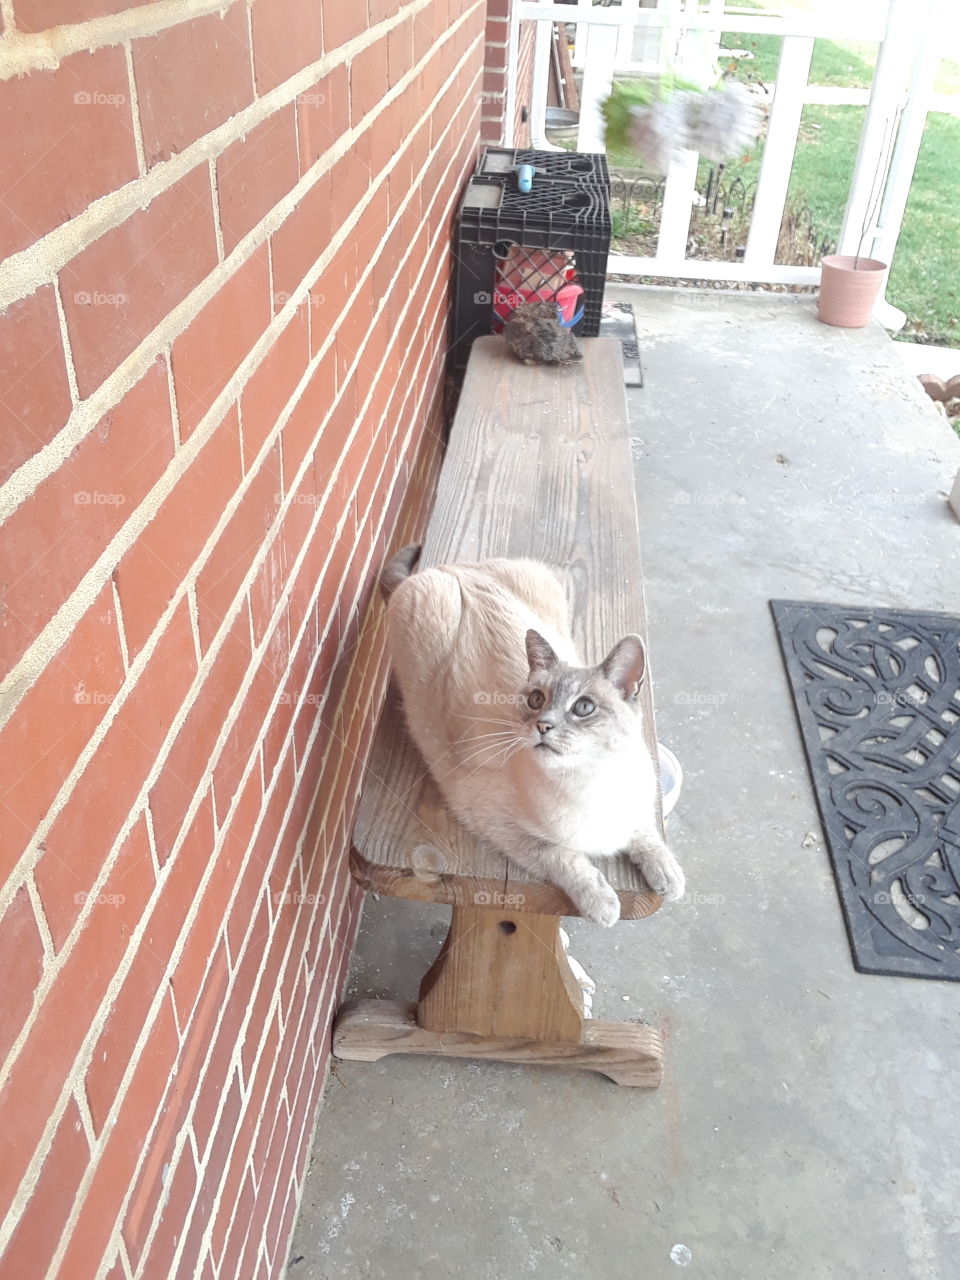 Siamese Tabby cat with blue eyes in on the porch brick background on the bench